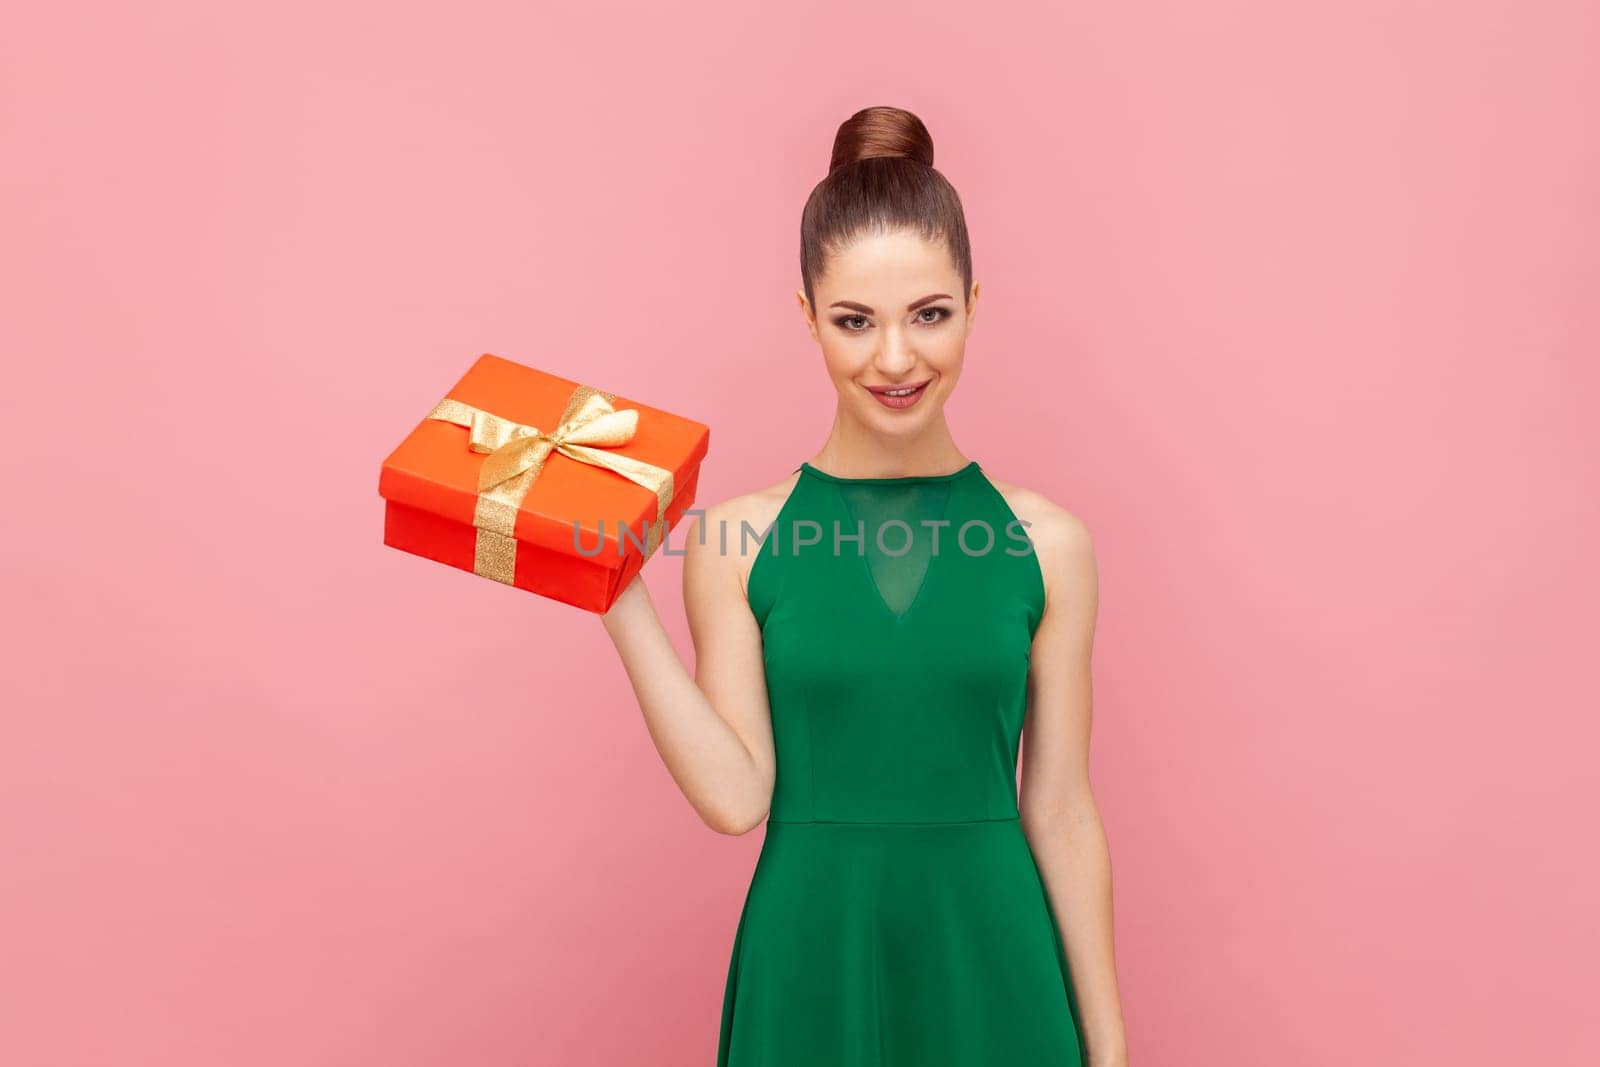 Portrait of attractive positive smiling woman standing with red present box, looking at camera, celebrating holiday, wearing green dress. Indoor studio shot isolated on pink background.